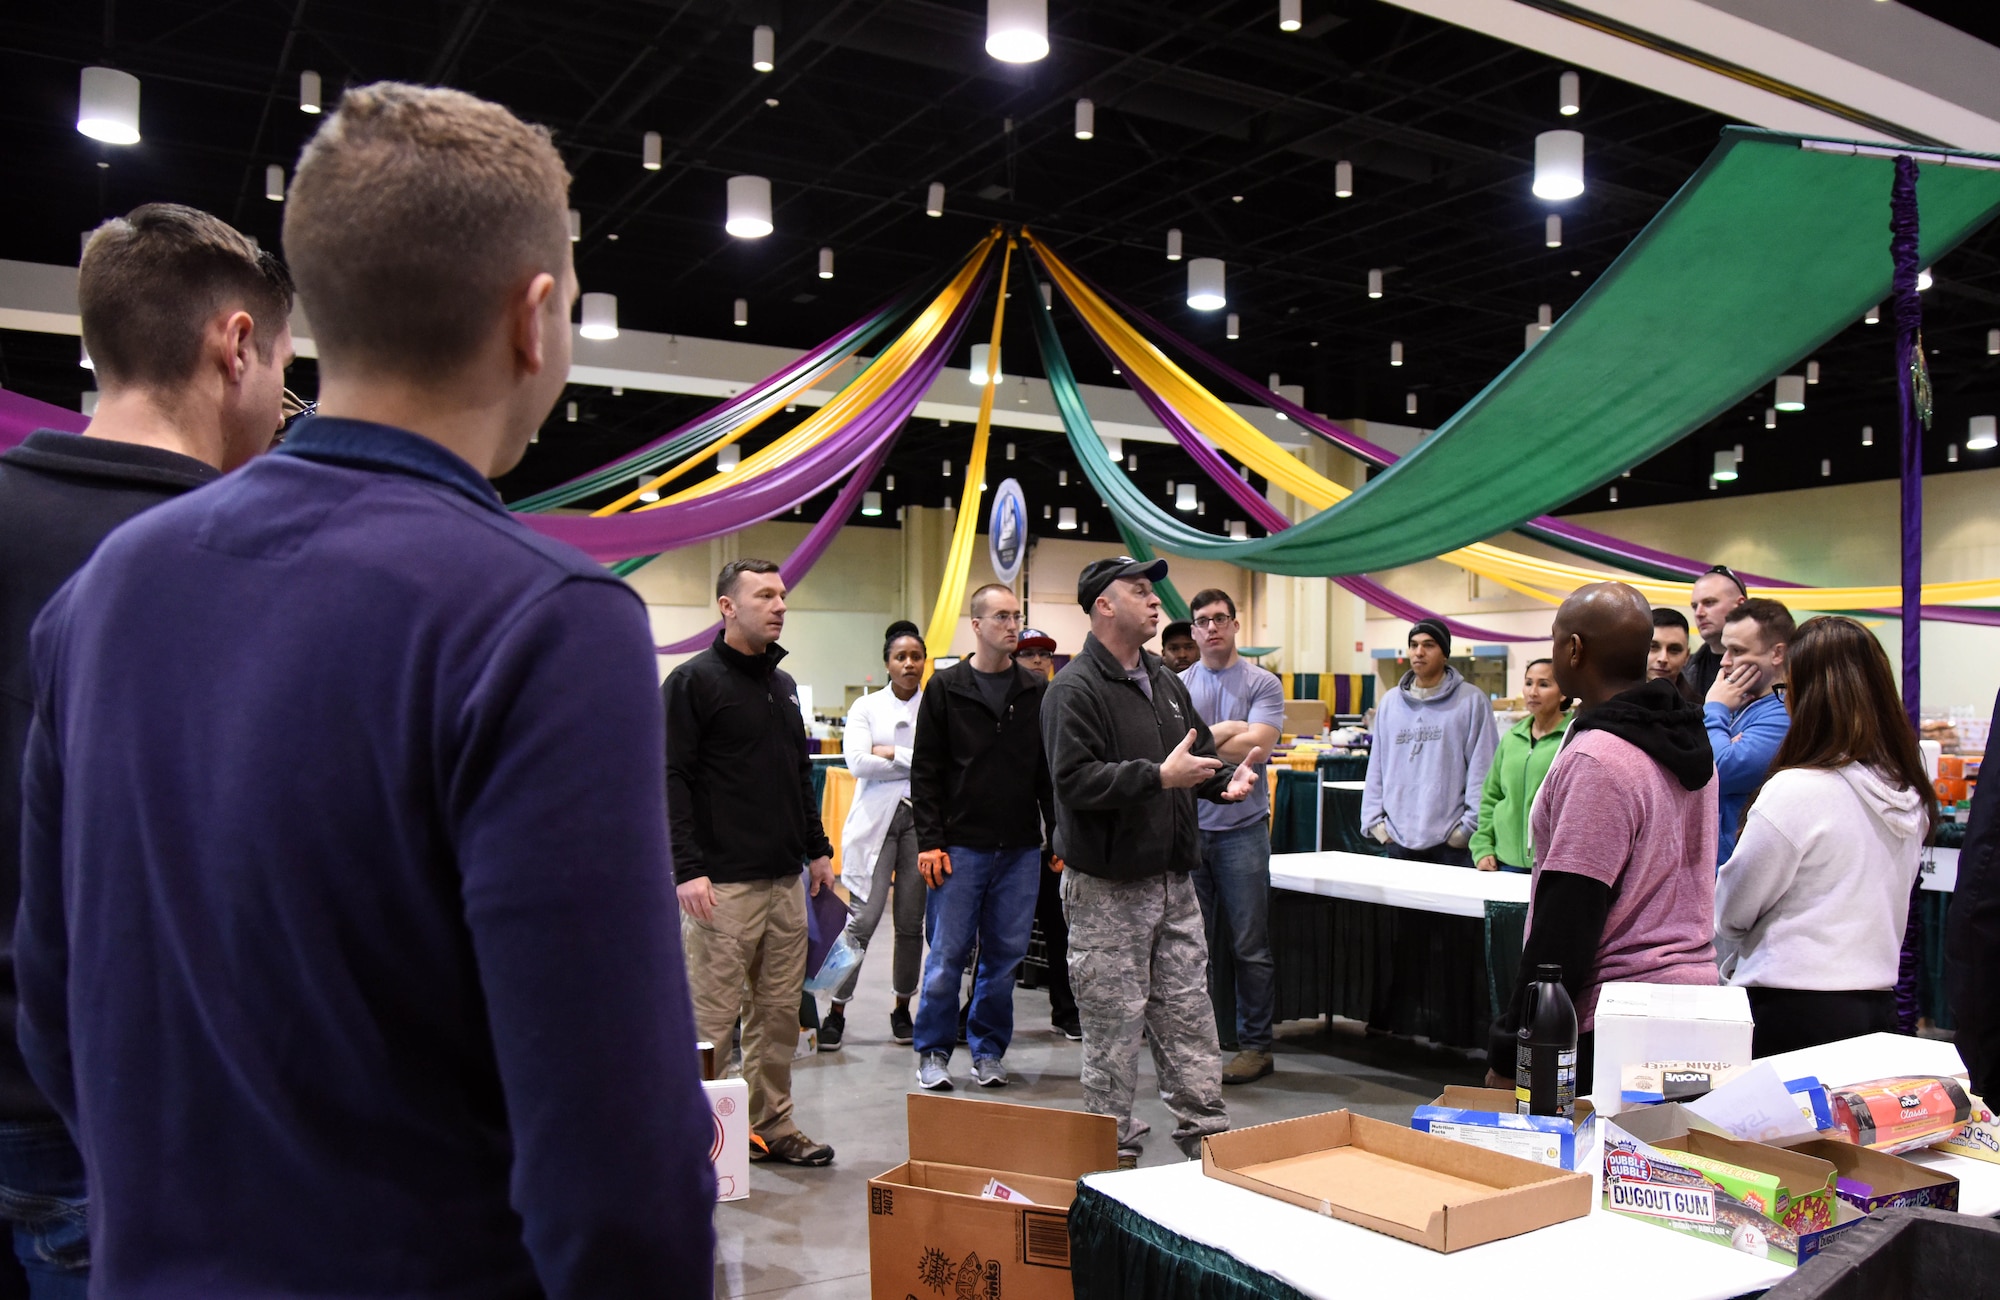 Col. Danny Davis, 81st Mission Support Group commander, thanks Keesler personnel for volunteering during a food drive at the Mississippi Coast Coliseum and Convention Center Jan. 16, 2018, Biloxi, Mississippi. More than 80 Airmen participated in the wing-level community sponsored volunteer event packaging over 21,000 pounds of food, equating to approximately 17,500 meals that will be provided to hunger relief. (U.S. Air Force photo by Kemberly Groue)